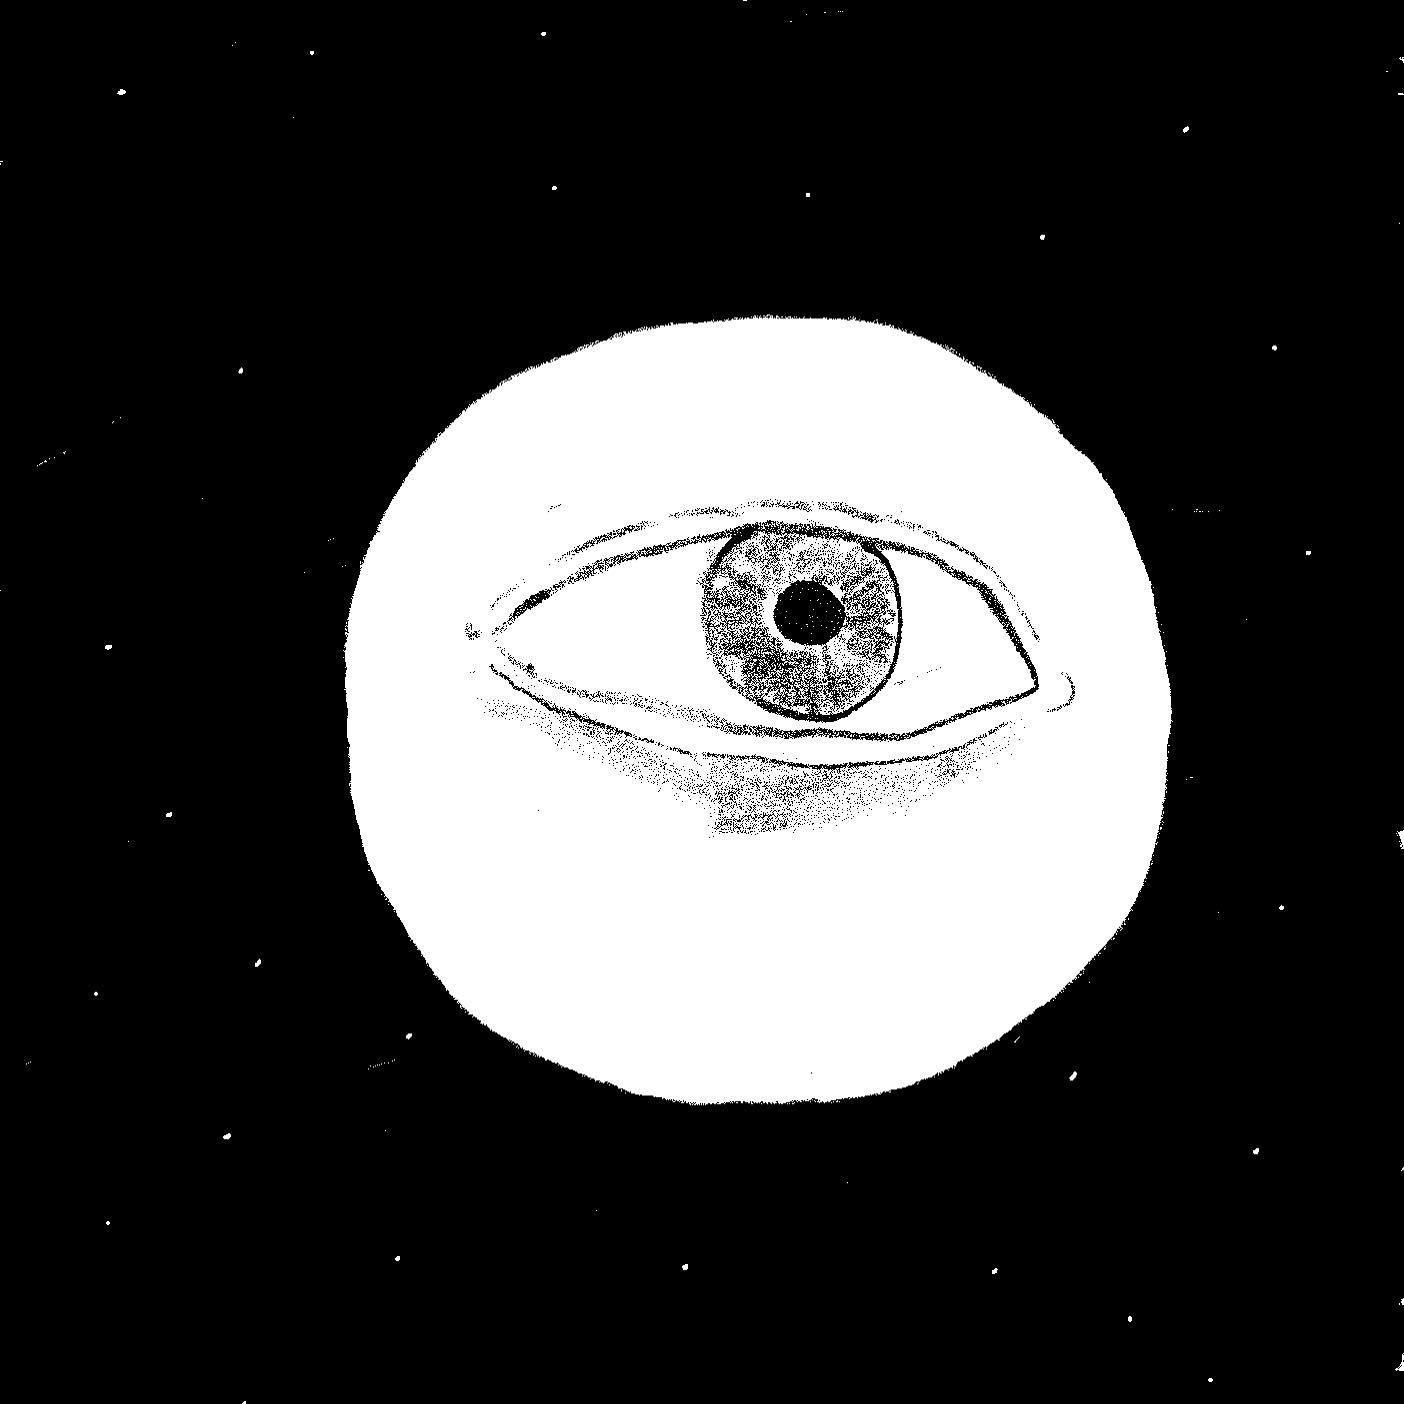 The Eye in the night sky, as described in the story.